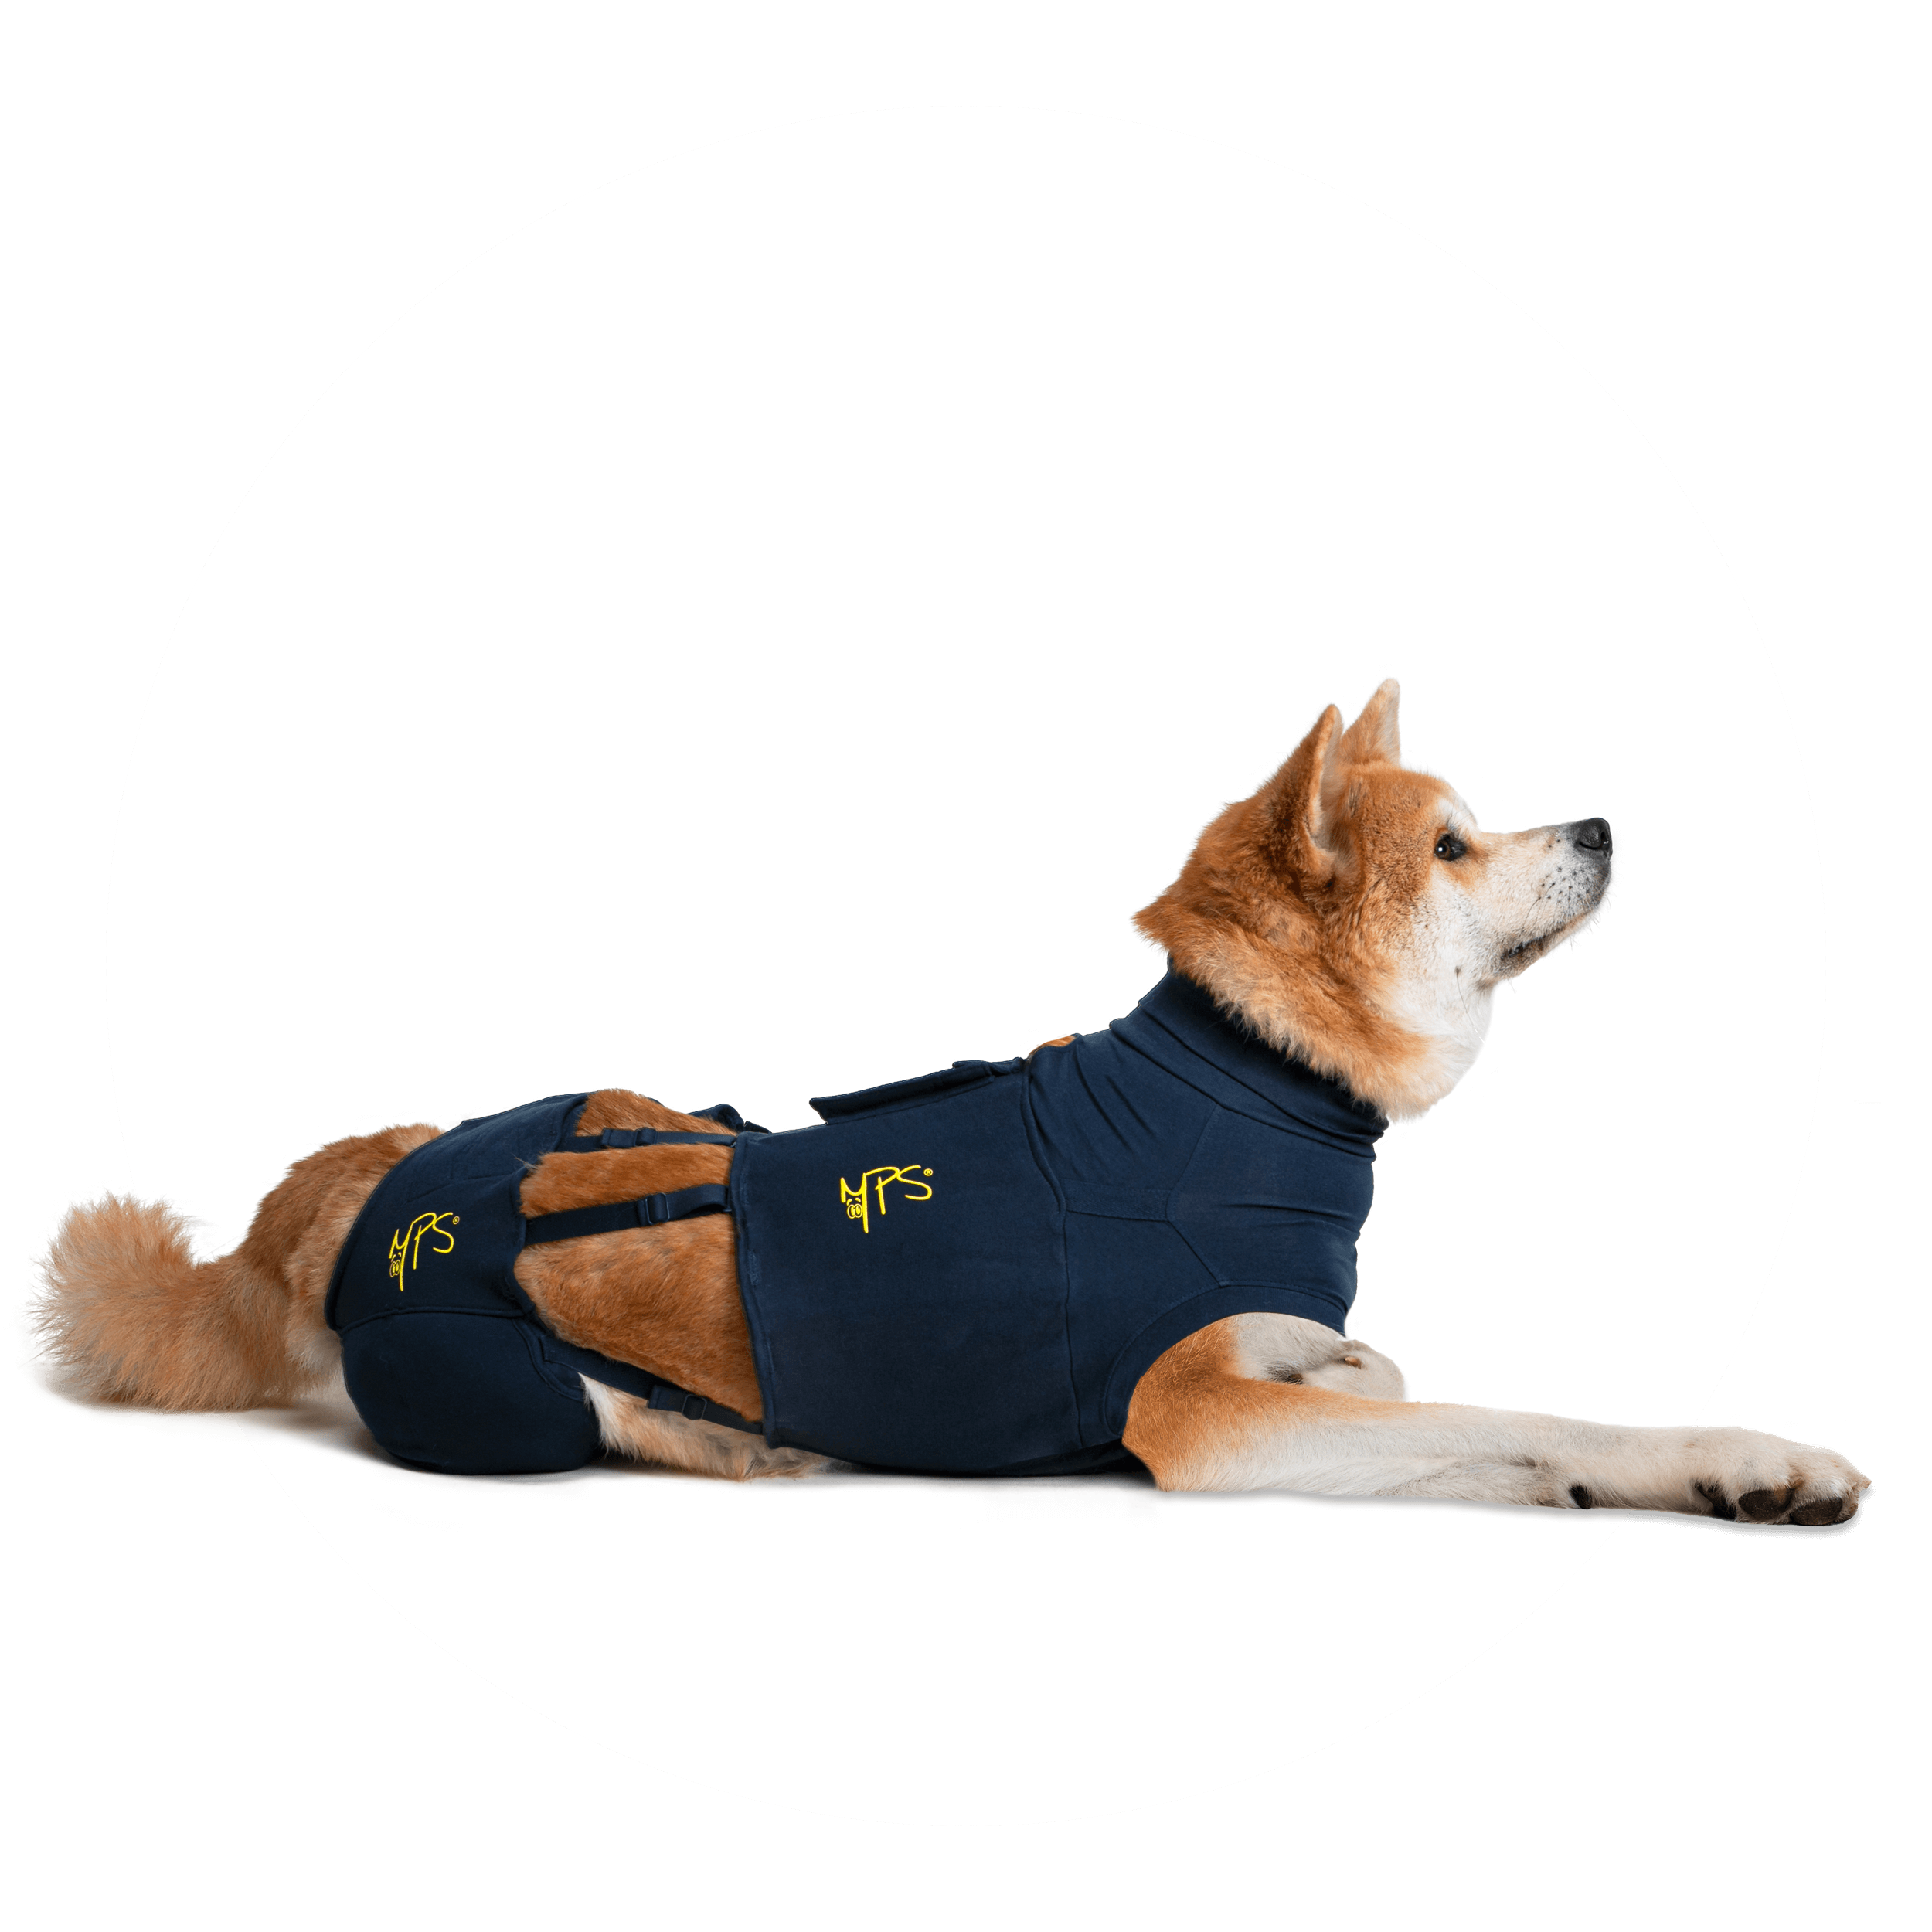 ©-MPS-CIRCLE-OVERVIEW-HIND-LEG-SLEEVES.DOG-02-V01.2019-1.png